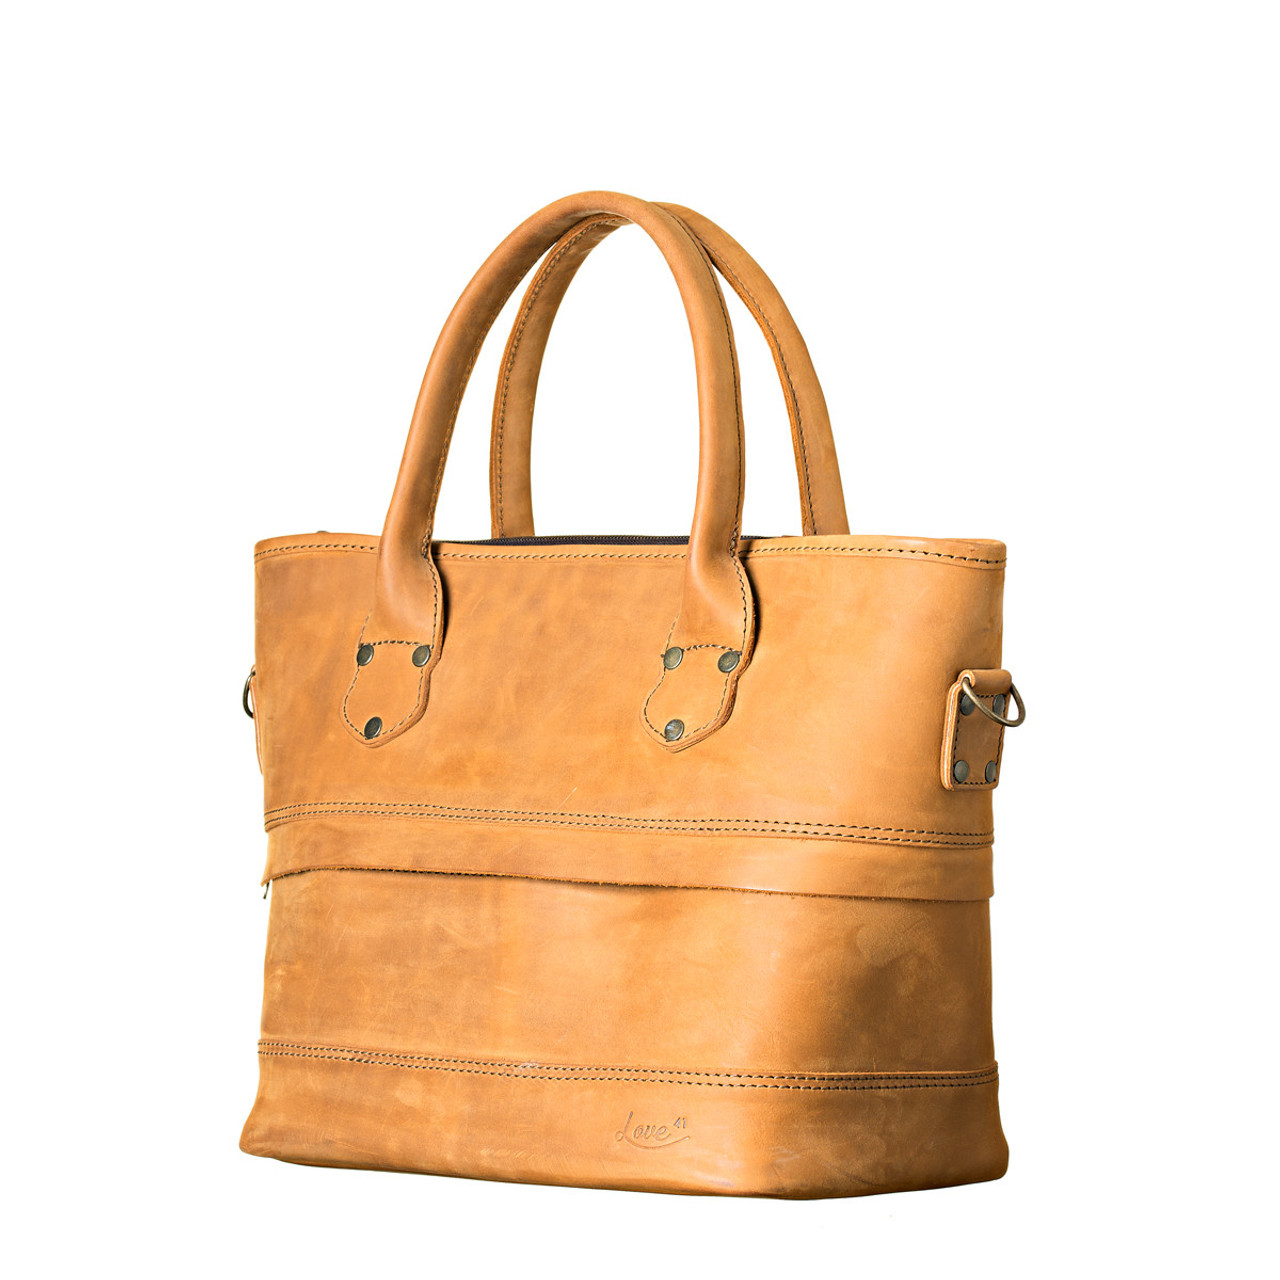 Leather Tote Travel Bag | A Carry on Overnight Weekend Bag made of